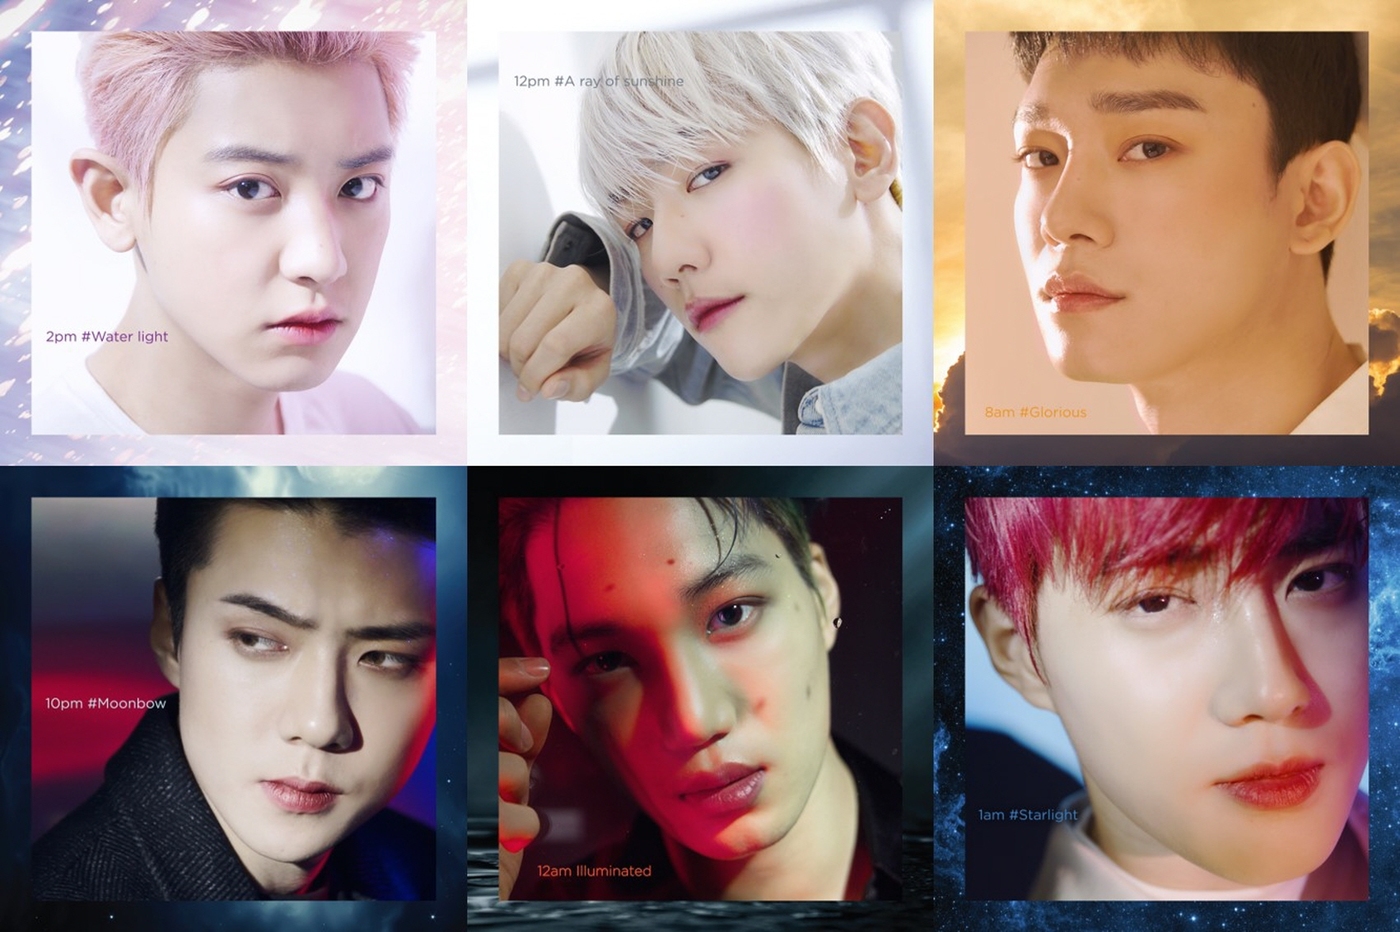 Seoul = = Nature Republic breaks up with the idol group EXO (EXO), which has been working as a full-time model for about 8 years.According to the cosmetics industry on the 16th, Nature Republic decided not to extend its exclusive contract with EXO, which expires on the 29th of next month.EXO has been a dedicated model of Nature Republic since 2013.Nature Republic is informing its owners of the expiration of the contract ahead of the expiration of the contract and encouraging the company to burn out its products, including collaborative products with EXO, which is in store.Prior to this, Nature Republic released the Winter Special Edition EXO Edition Water Tint, which collaborated with EXO last month.In addition, the company is launching a global color campaign by releasing a makeup picture with the concept of 12 Shades of Light.Some say that the decision not to extend the contract that has been going on for eight years is due to the marriage and the news of EXOs main vocal Chen.Chen announced the marriage news with a non-entertainer bride in a handwritten letter on the fan site on the 13th, and later took control of the portal sites real-time search term.When news of his marriage became known, some fans even issued a statement calling for Chen to leave.It is difficult to say exactly when the exclusive contract expires, but it is due to expire in the contract by spring this year, said a Nature Republic official.  (With the expiration of the exclusive contract), it is irrelevant to this issue.Who will be the next model of Nature Republic following EXO is also of interest. (Nature Republics selection of new models) has not yet been confirmed, the official said.Exited contract expires on 29th of next month...The companys nothing to do with Chen marriage issues.